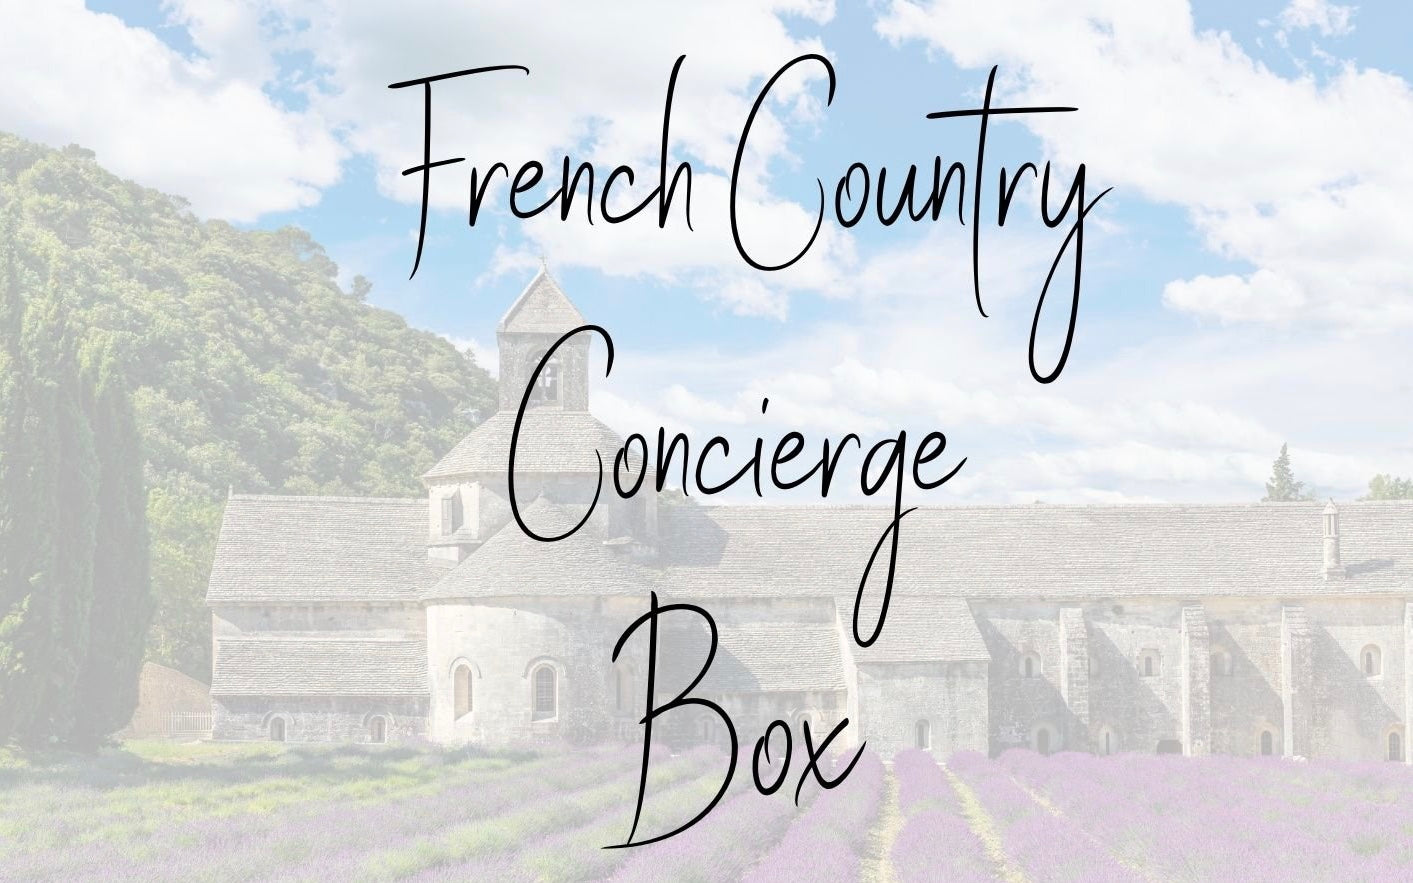 French Country Concierge Subscription Box (For Delivery in U.S.A. 🇺🇸)